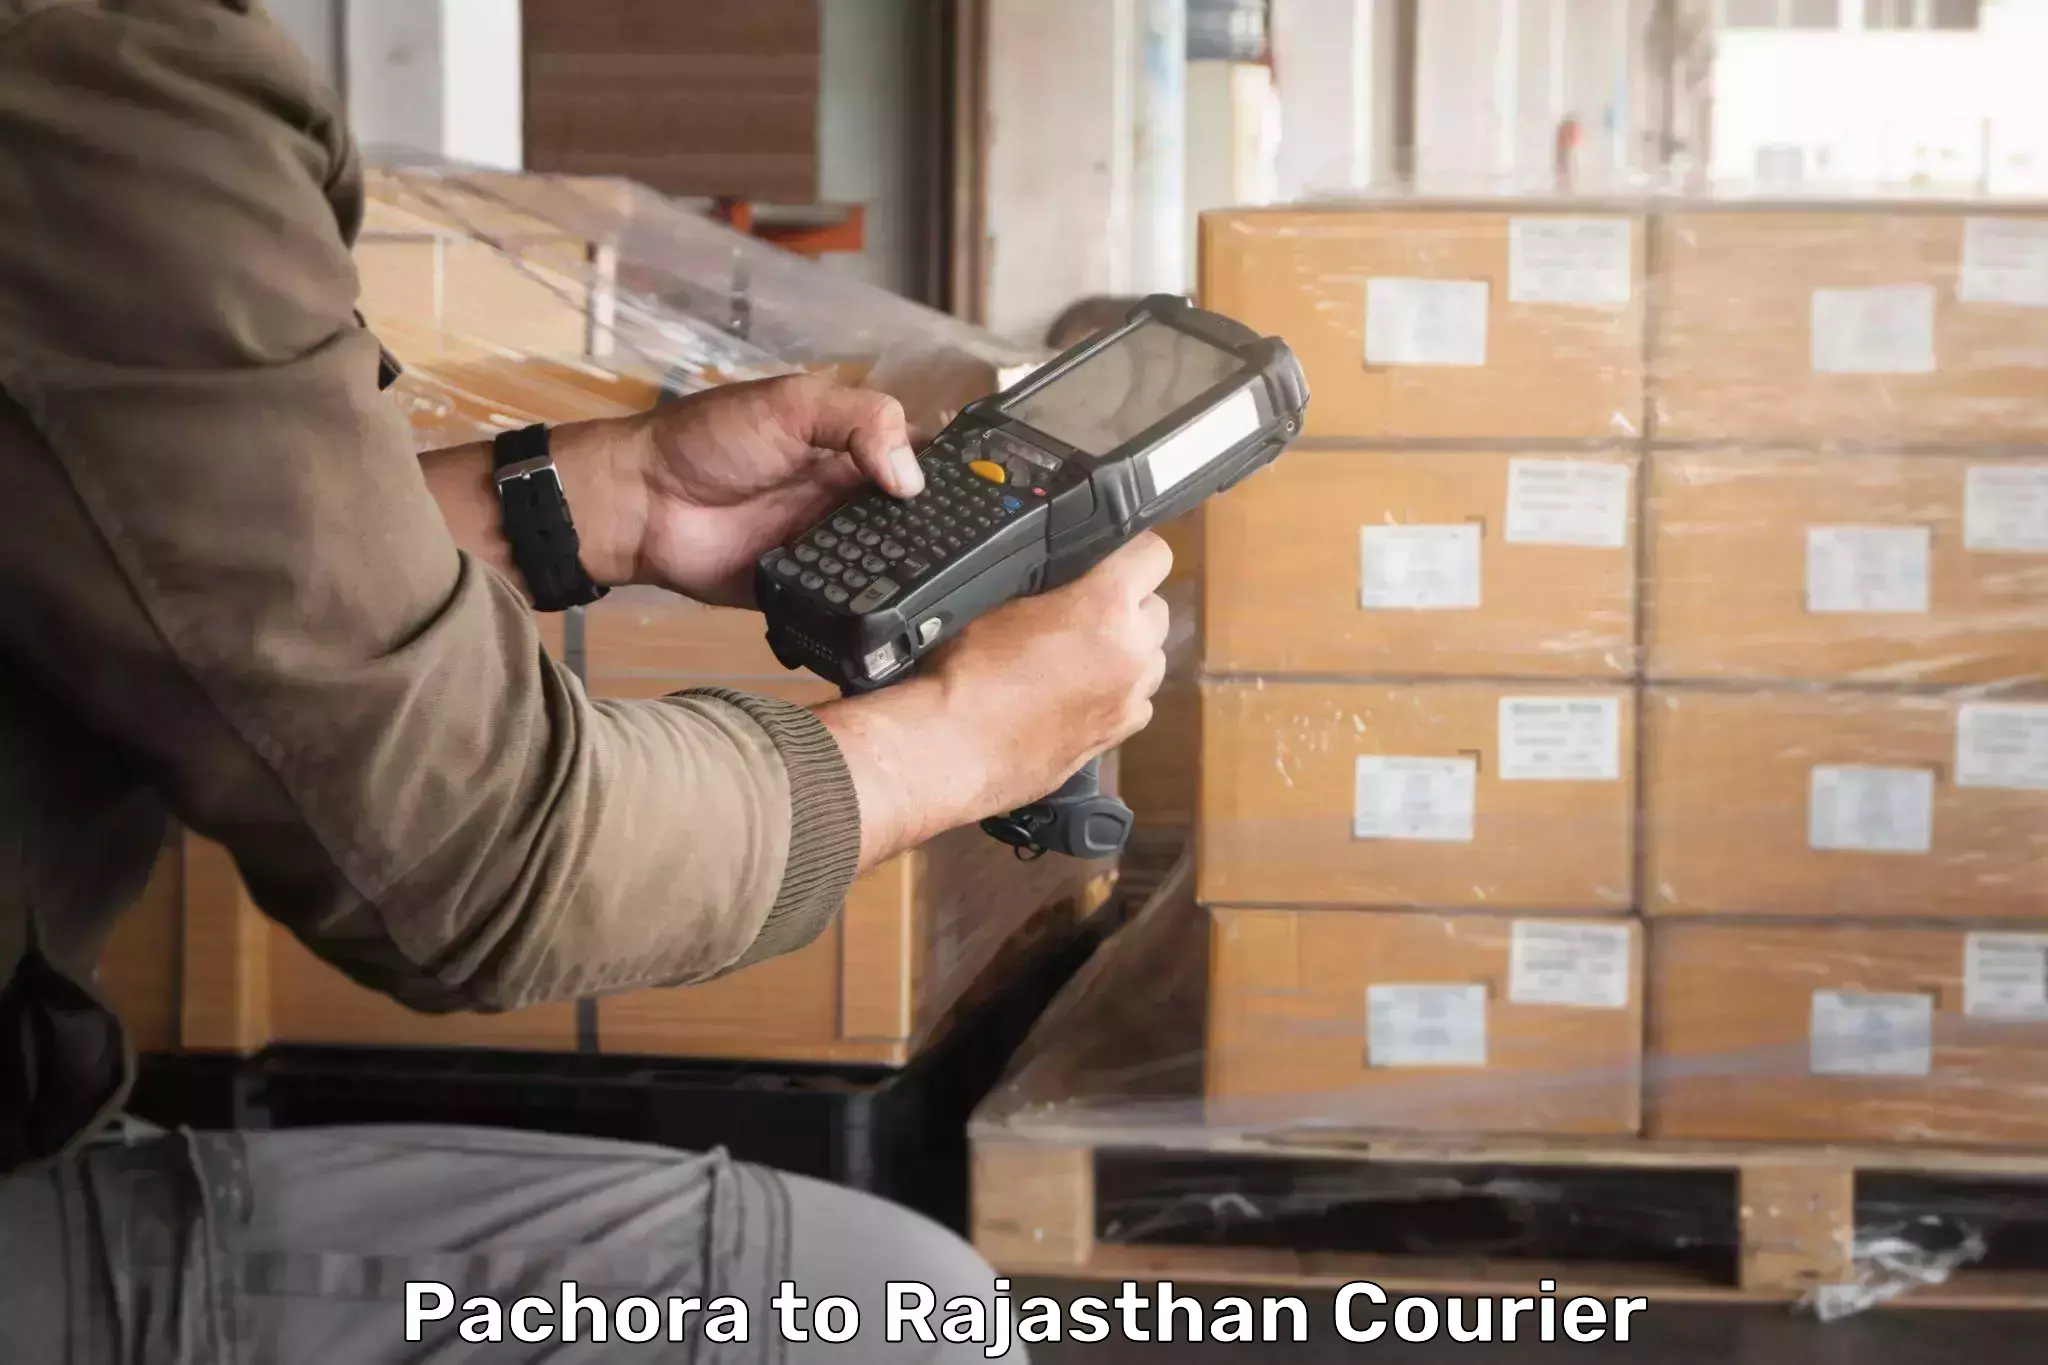 Professional courier handling Pachora to Chaumahla